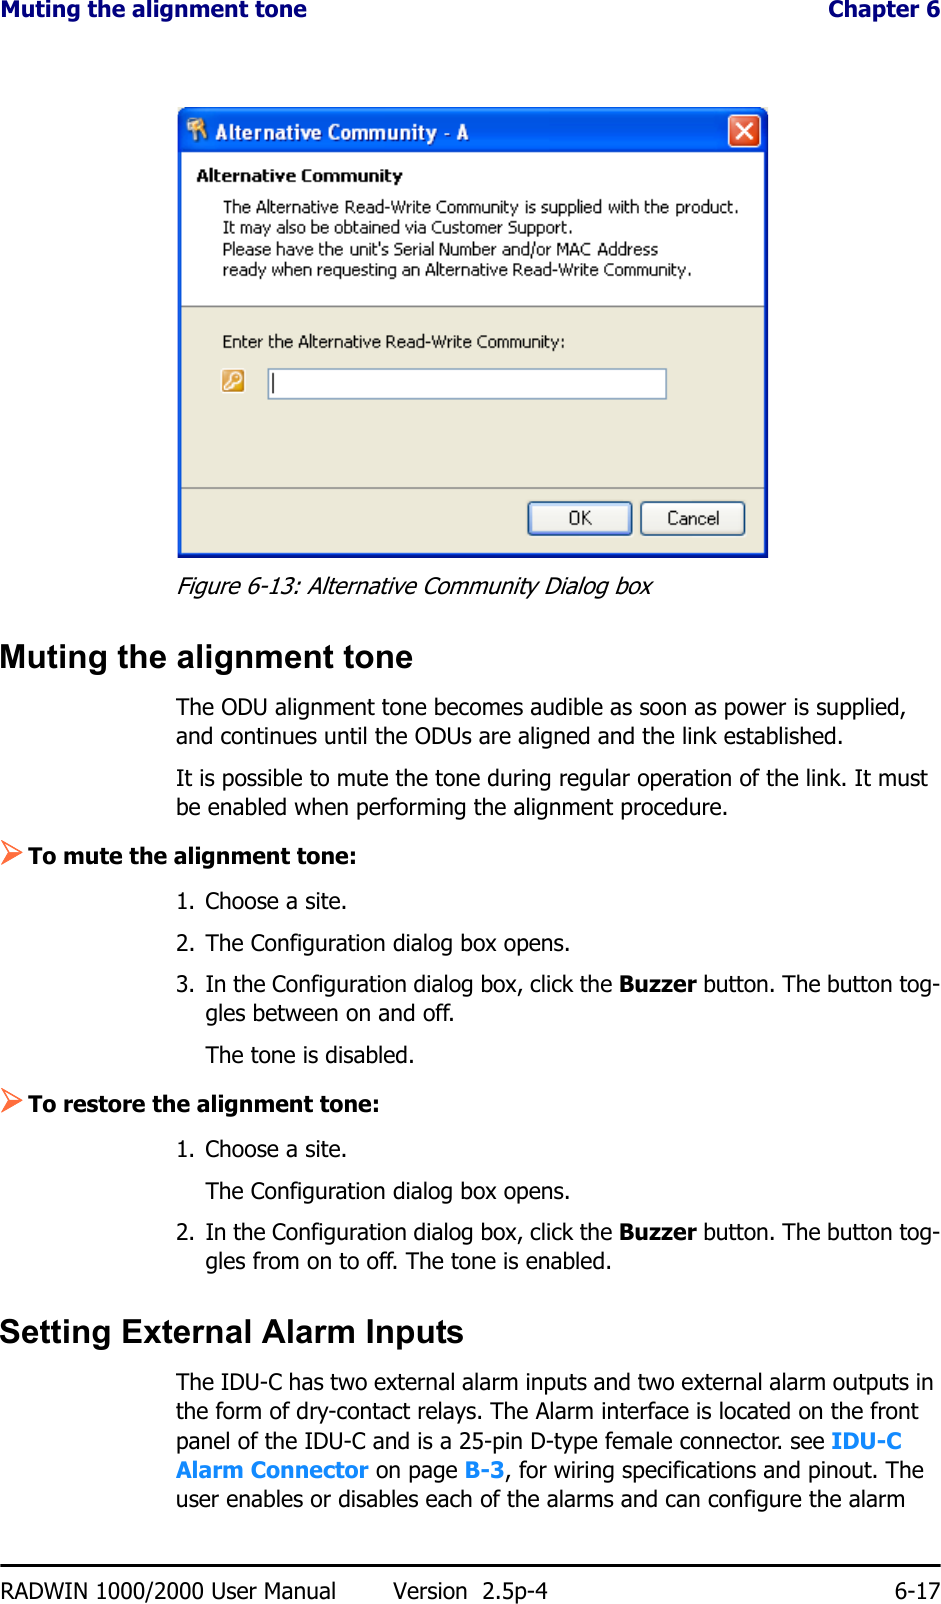 Muting the alignment tone  Chapter 6RADWIN 1000/2000 User Manual Version  2.5p-4 6-17Figure 6-13: Alternative Community Dialog boxMuting the alignment toneThe ODU alignment tone becomes audible as soon as power is supplied, and continues until the ODUs are aligned and the link established.It is possible to mute the tone during regular operation of the link. It must be enabled when performing the alignment procedure.¾To mute the alignment tone:1. Choose a site.2. The Configuration dialog box opens.3. In the Configuration dialog box, click the Buzzer button. The button tog-gles between on and off.The tone is disabled.¾To restore the alignment tone:1. Choose a site.The Configuration dialog box opens.2. In the Configuration dialog box, click the Buzzer button. The button tog-gles from on to off. The tone is enabled.Setting External Alarm InputsThe IDU-C has two external alarm inputs and two external alarm outputs in the form of dry-contact relays. The Alarm interface is located on the front panel of the IDU-C and is a 25-pin D-type female connector. see IDU-C Alarm Connector on page B-3, for wiring specifications and pinout. The user enables or disables each of the alarms and can configure the alarm 